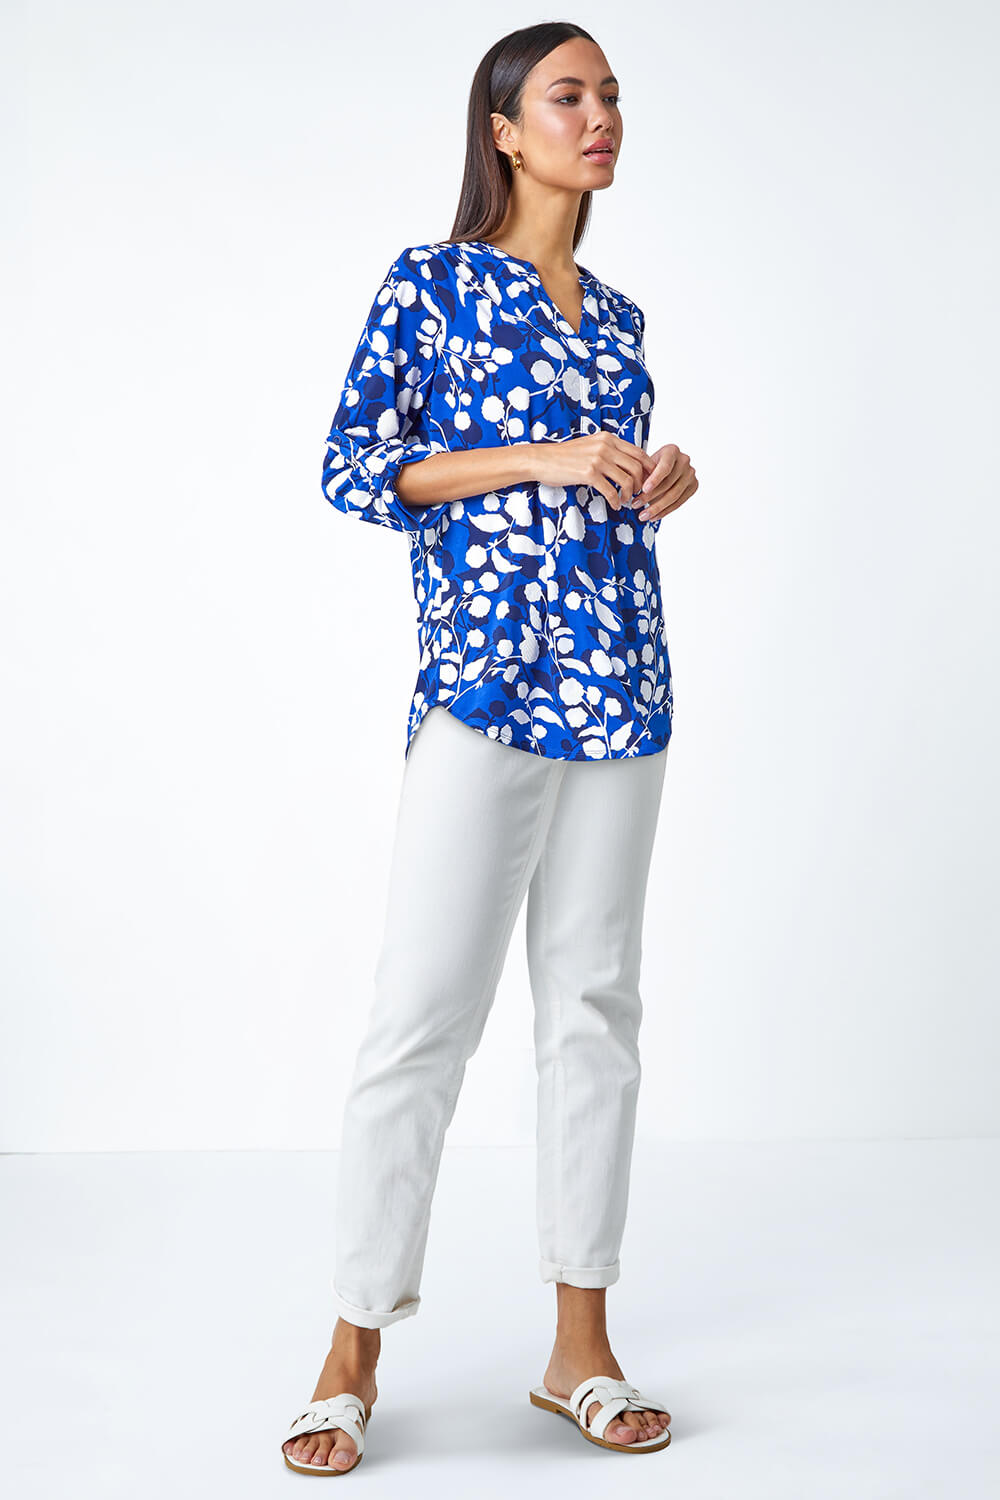 Royal Blue Textured Floral Print Stretch Shirt, Image 2 of 5